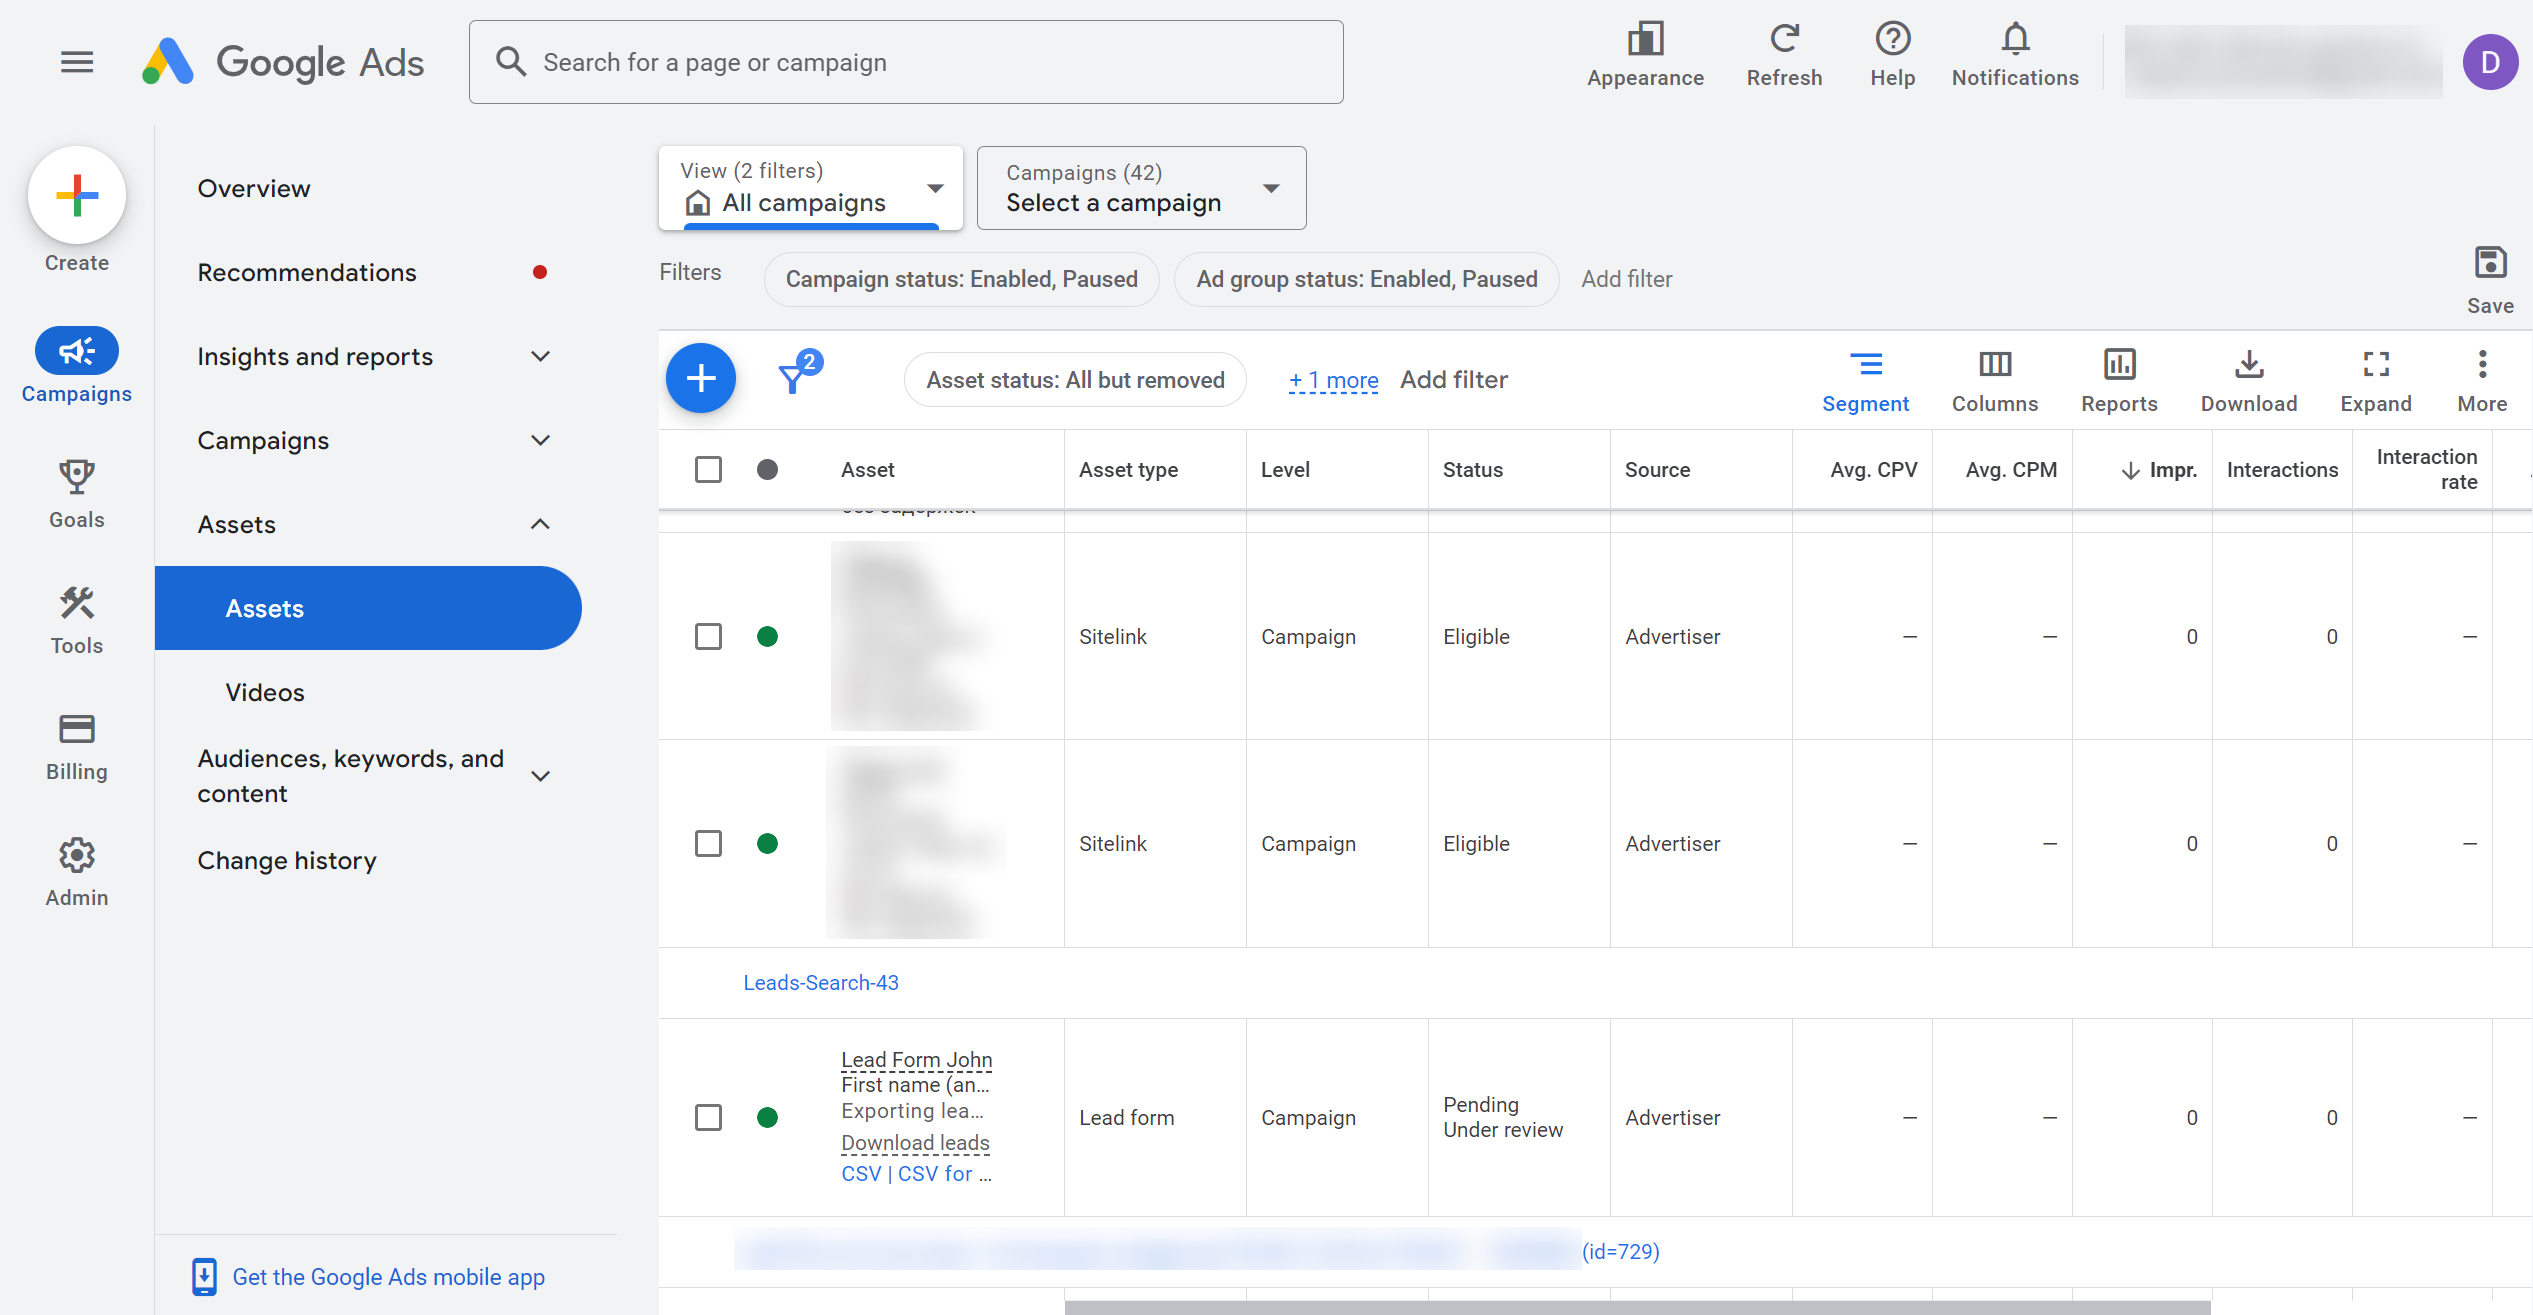 How to Connect Google Lead Form with BigQuery | Data Source account connection